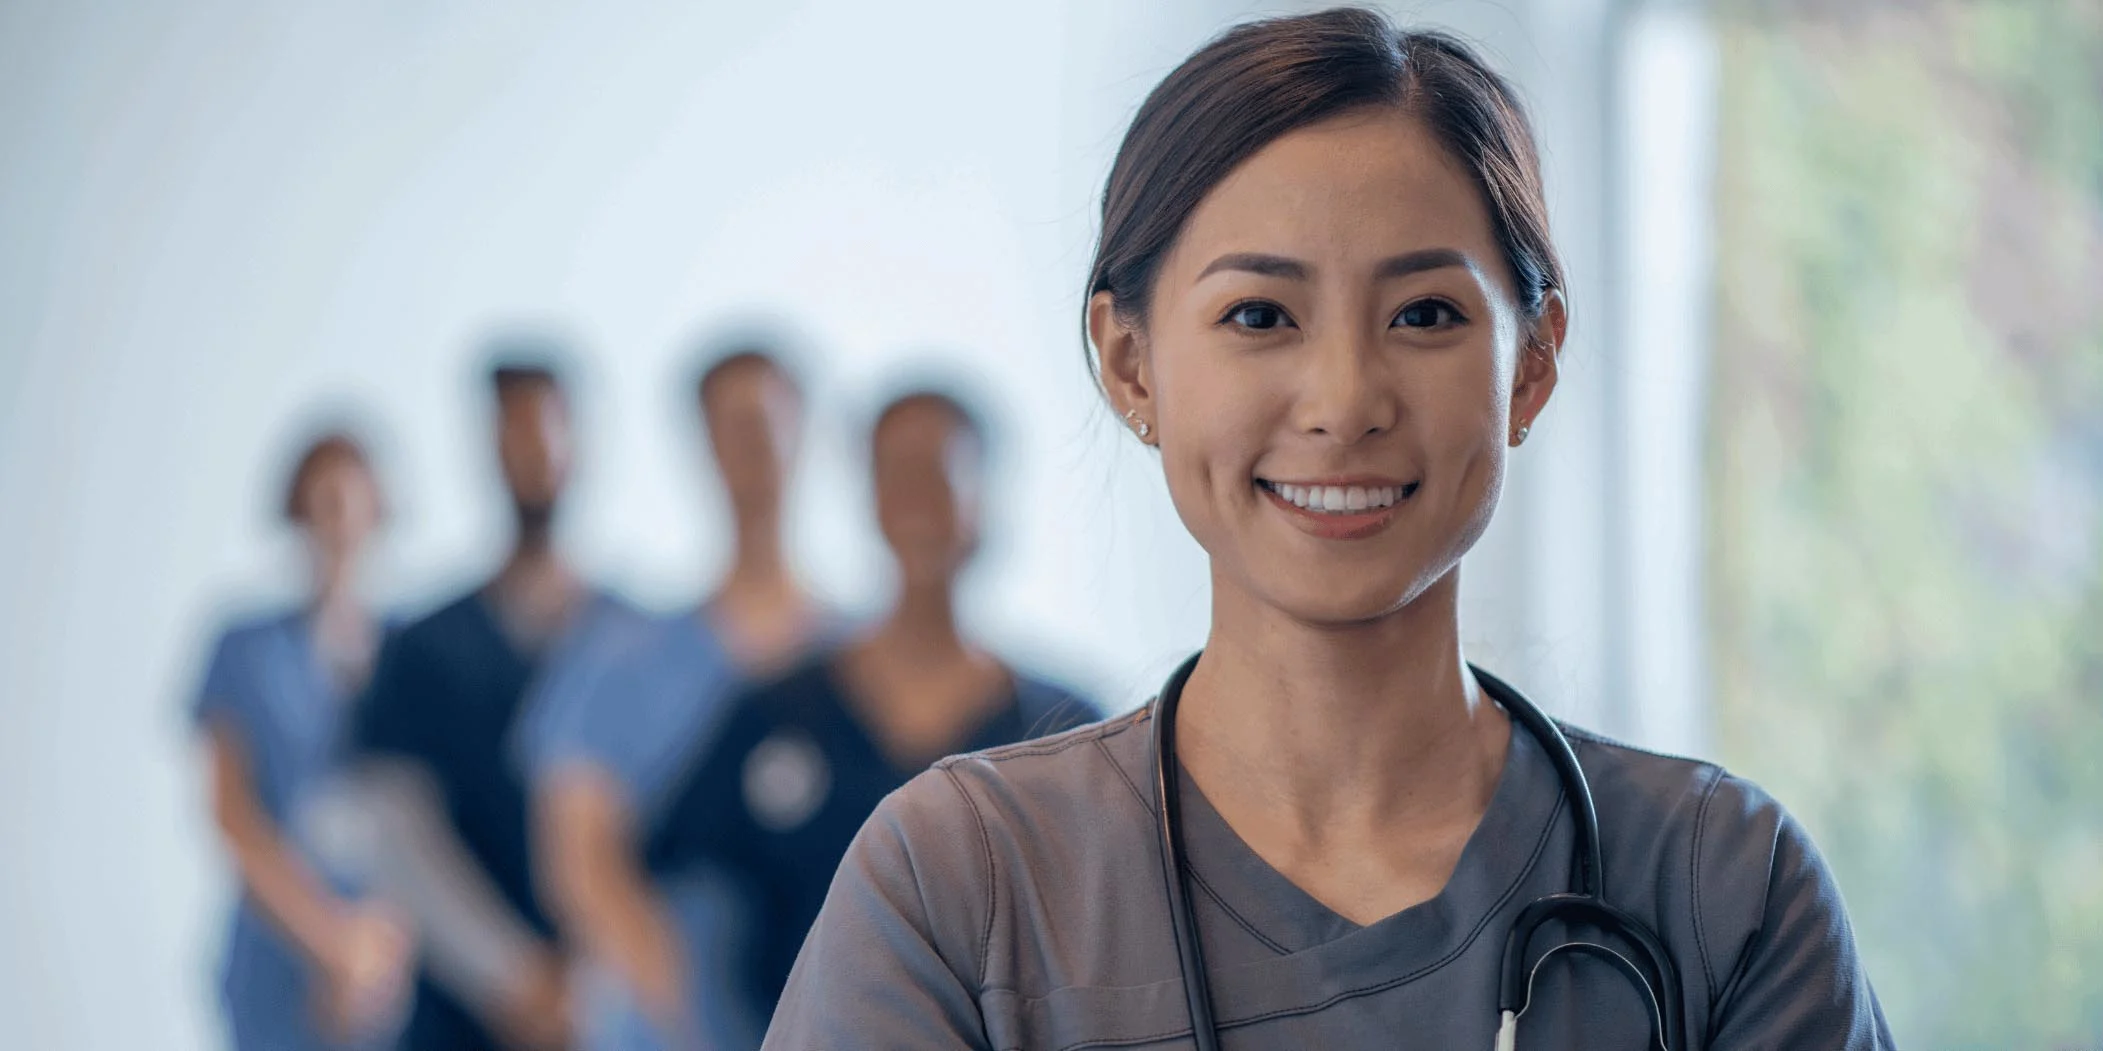 An Asian woman nurse smiles as she stands in front of her team in the hospital hallway.